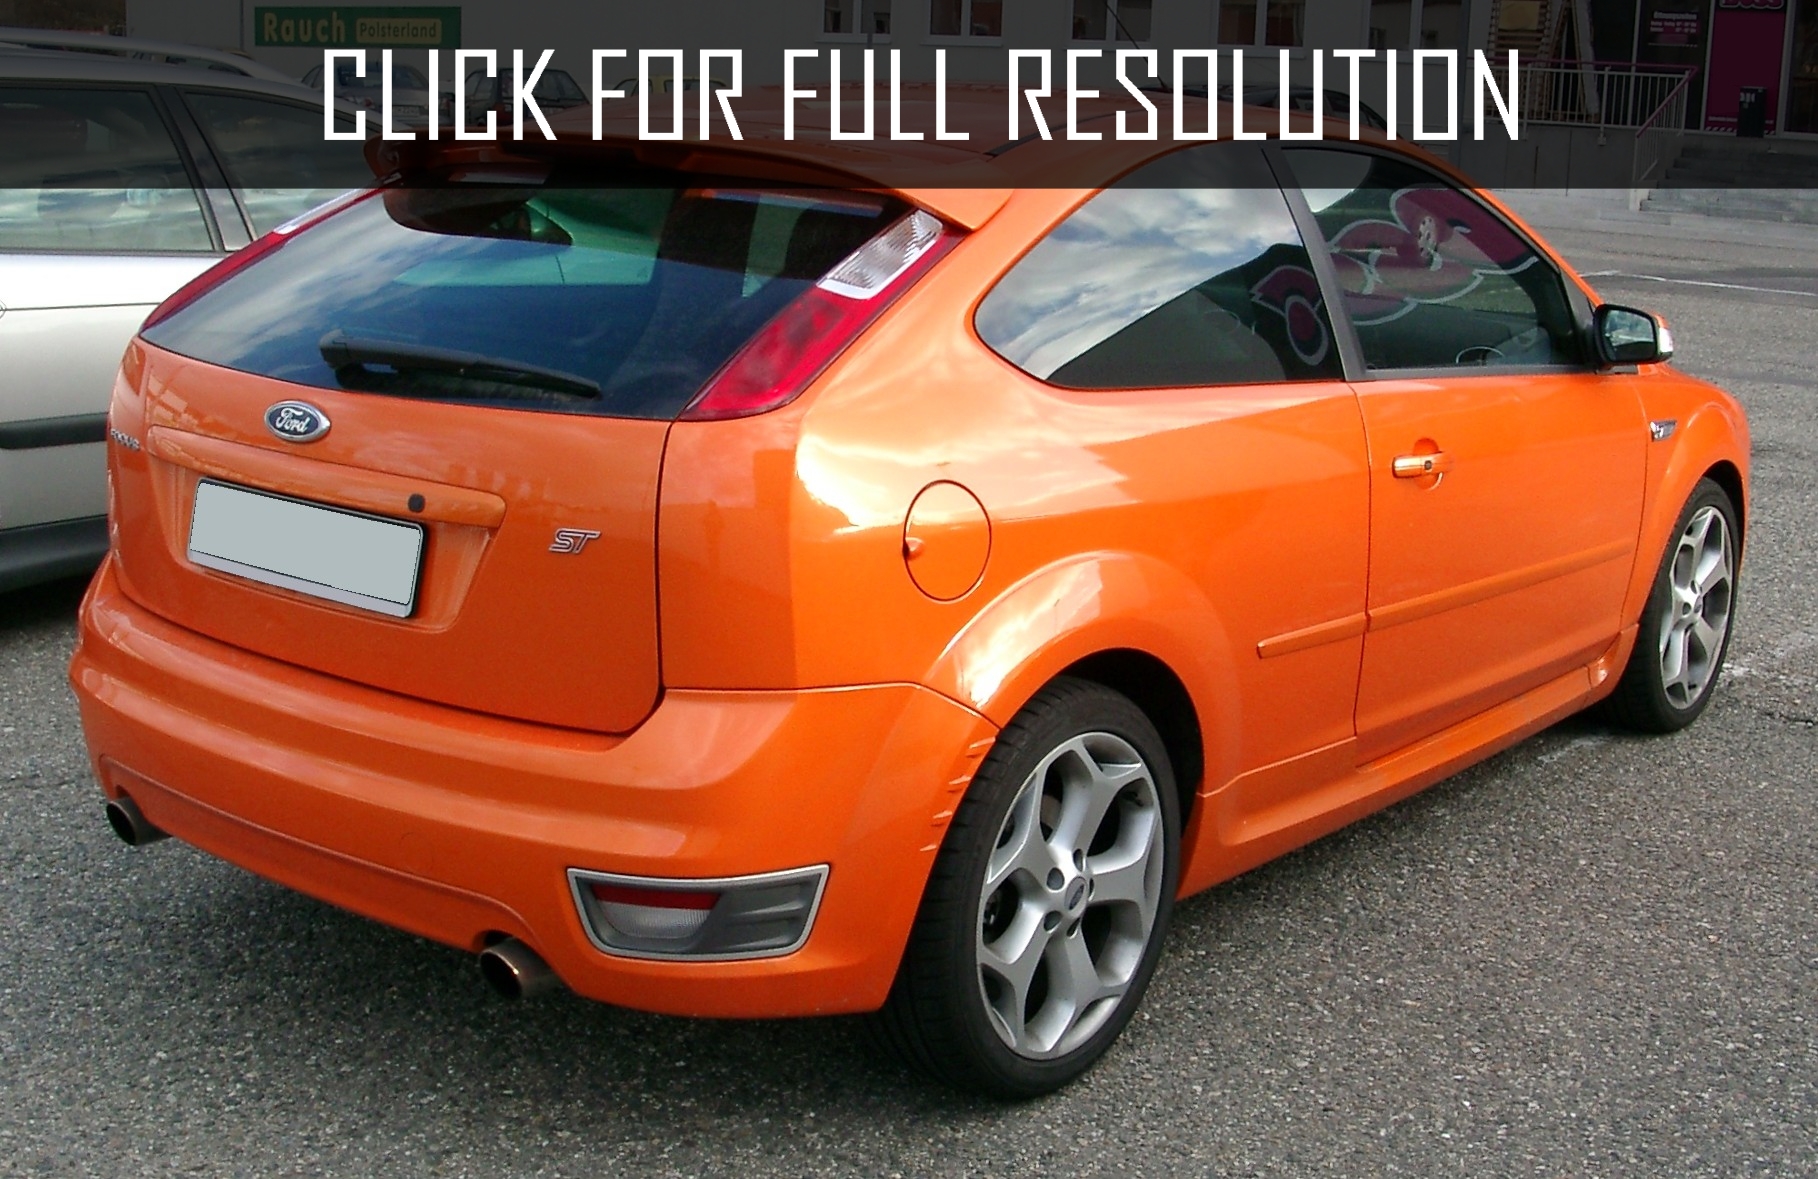 05 Ford Focus St Best Image Gallery 10 16 Share And Download